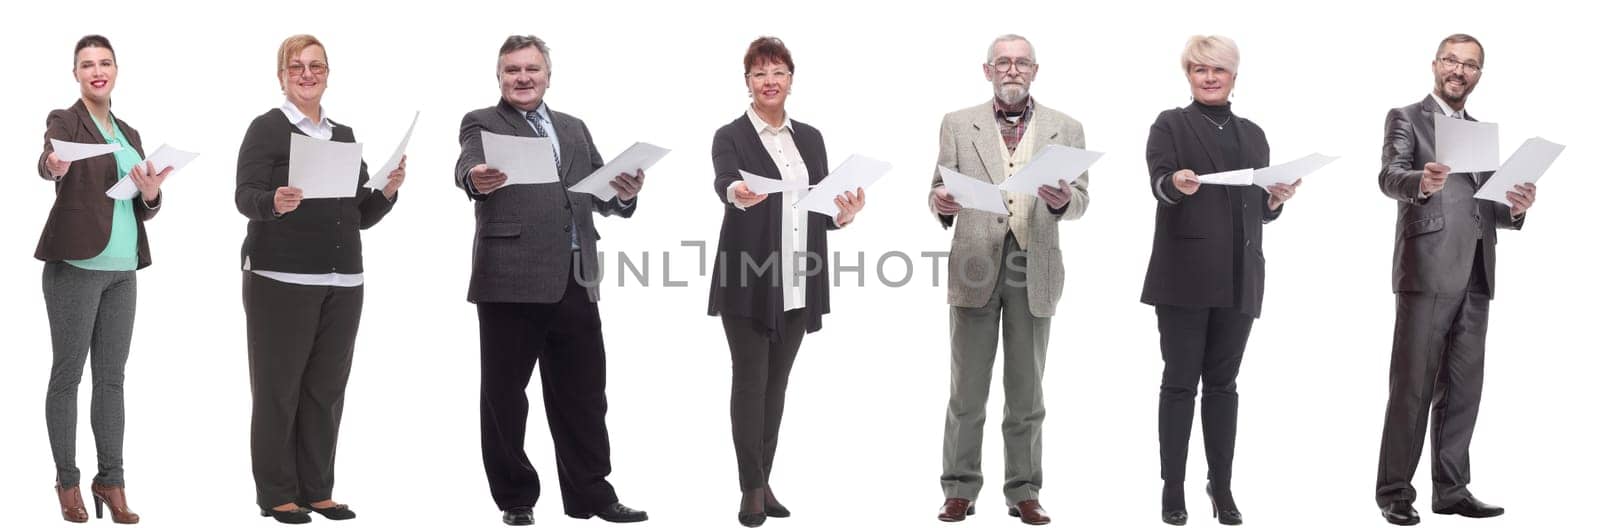 collage of people holding a4 sheet in hands by asdf